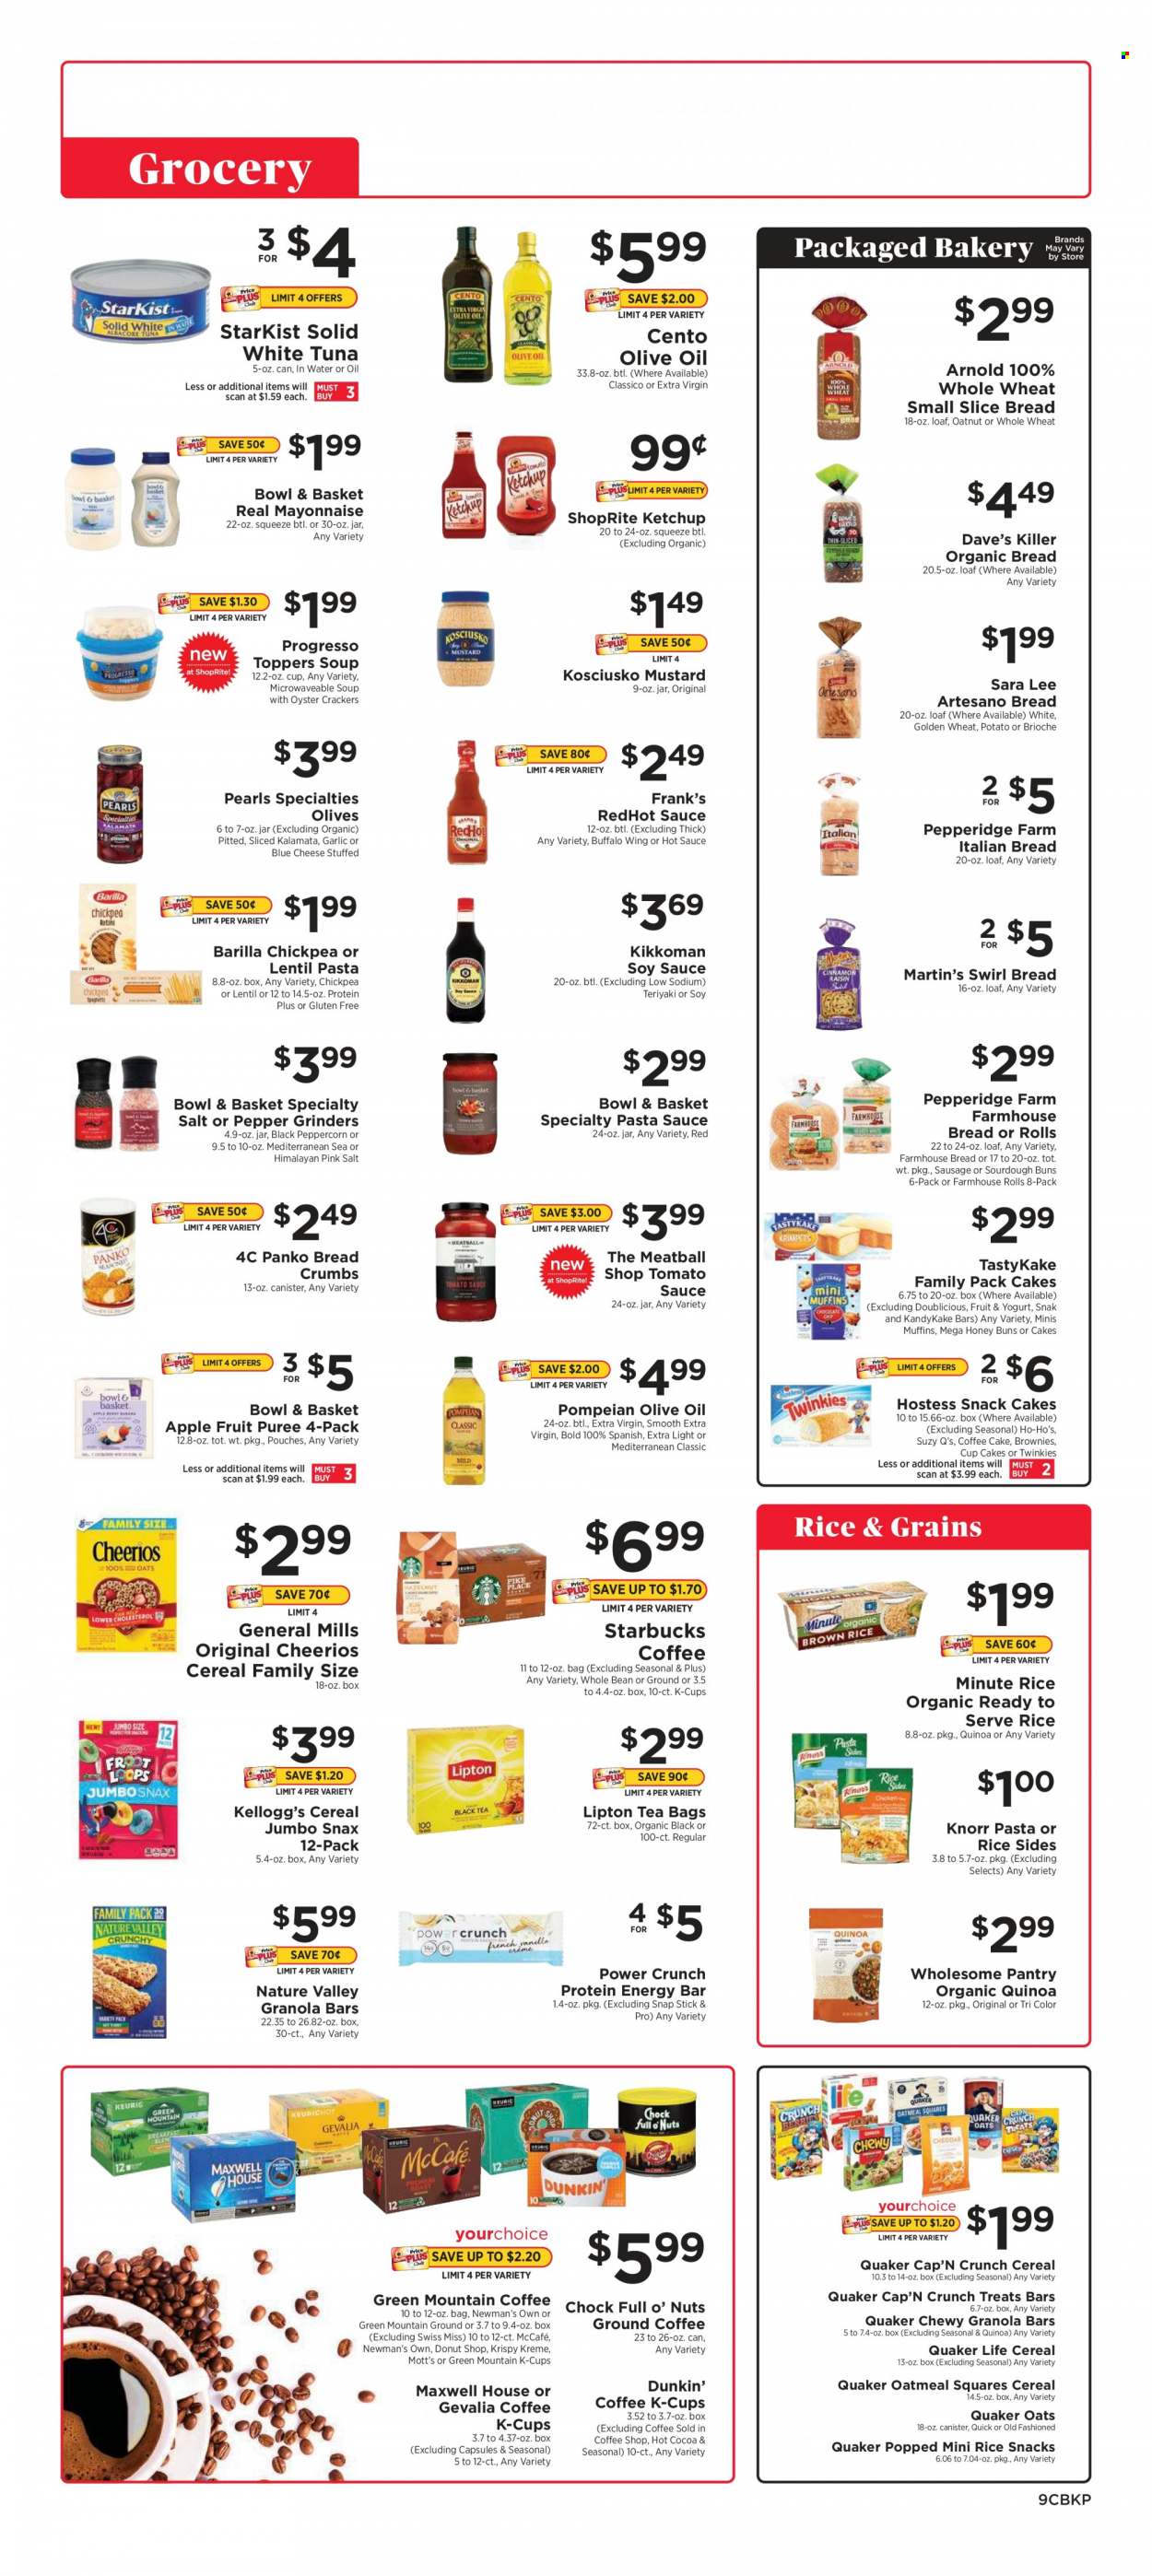 thumbnail - ShopRite Flyer - 09/19/2021 - 09/25/2021 - Sales products - buns, brioche, Sara Lee, Bowl & Basket, breadcrumbs, panko breadcrumbs, garlic, Mott's, tuna, oysters, StarKist, pasta sauce, soup, Knorr, sauce, Barilla, Quaker, Progresso, sausage, blue cheese, cheese, yoghurt, Swiss Miss, mayonnaise, snack, crackers, Kellogg's, oatmeal, oats, oyster crackers, tomato sauce, olives, cereals, Cheerios, granola bar, Cap'n Crunch, Nature Valley, quinoa, mustard, soy sauce, hot sauce, ketchup, Kikkoman, Classico, extra virgin olive oil, olive oil, honey, Lipton, hot cocoa, Maxwell House, tea bags, Starbucks, coffee capsules, McCafe, K-Cups, Gevalia, Green Mountain. Page 9.